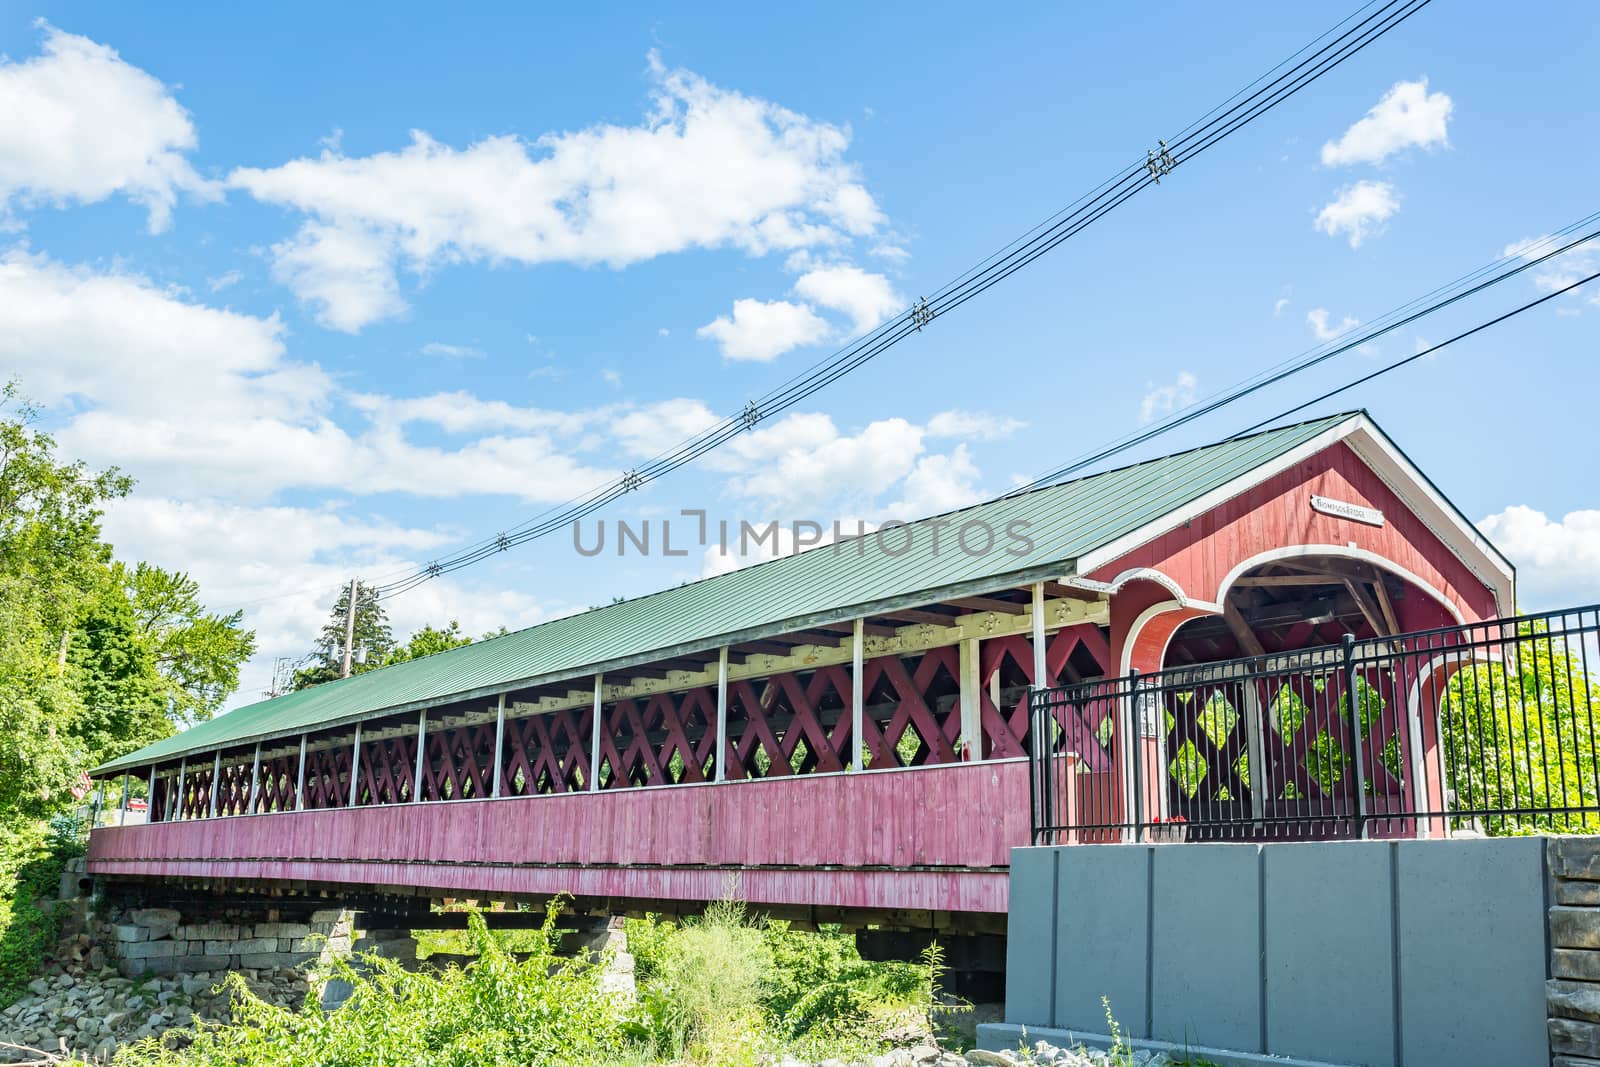 The West Swanzey Covered Bridge (also known as the Thompson Bridge) is a historic wooden covered bridge carrying Main Street over the Ashuelot River in West Swanzey, New Hampshire.